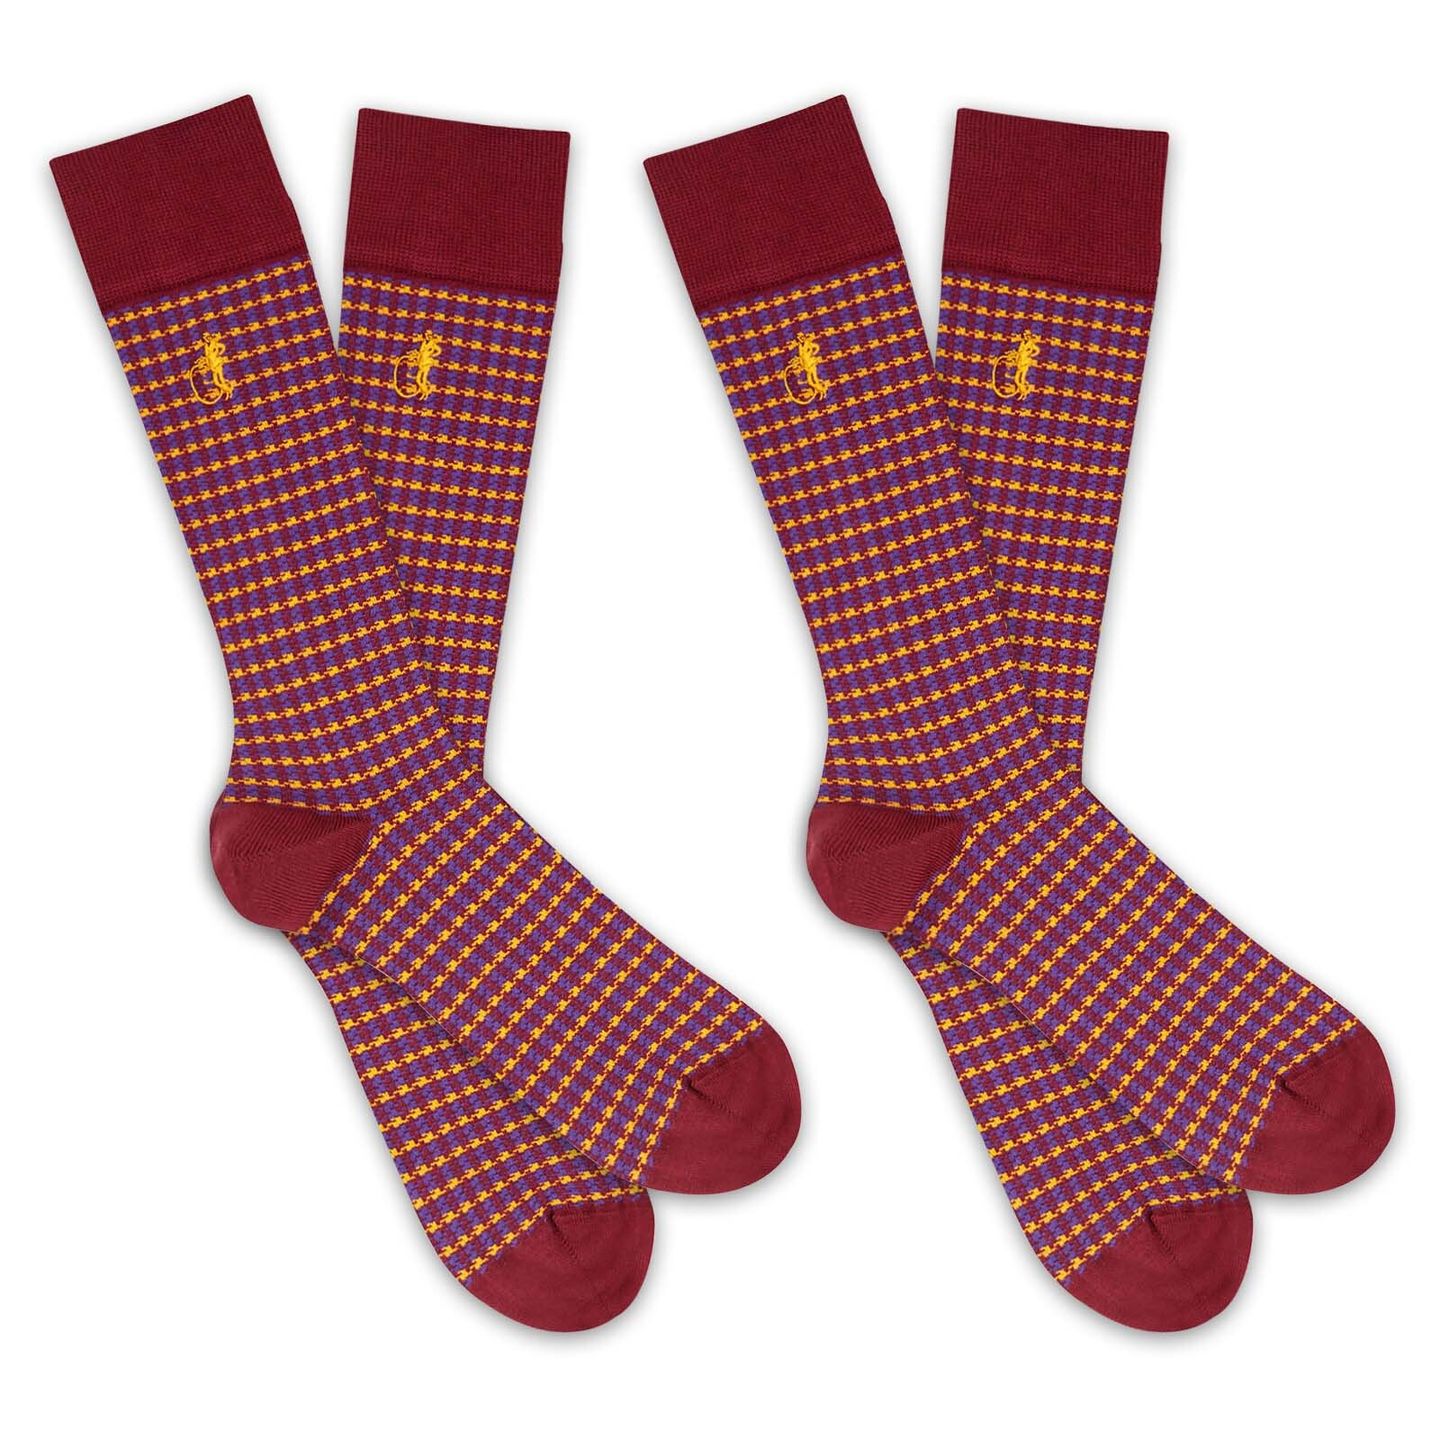 2 pair of red and yellow patterned socks with a white background